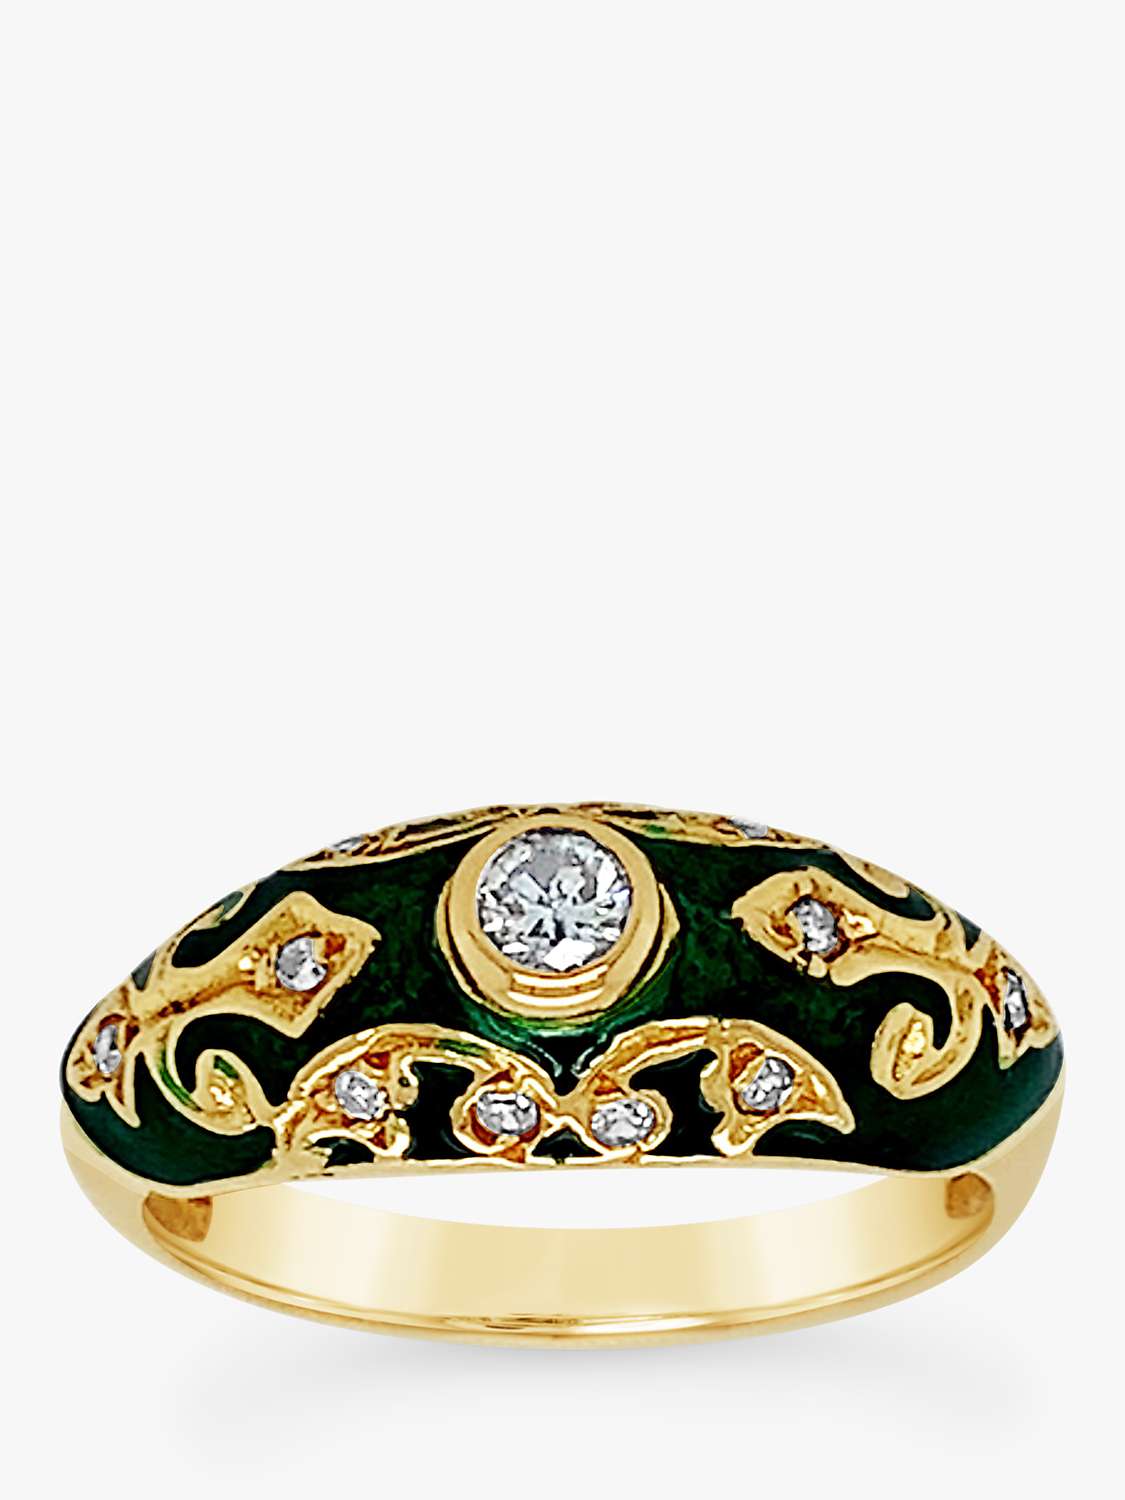 Buy Milton & Humble Jewellery 18ct Yellow Gold Second Hand Domed Enamel Diamond Ring Online at johnlewis.com